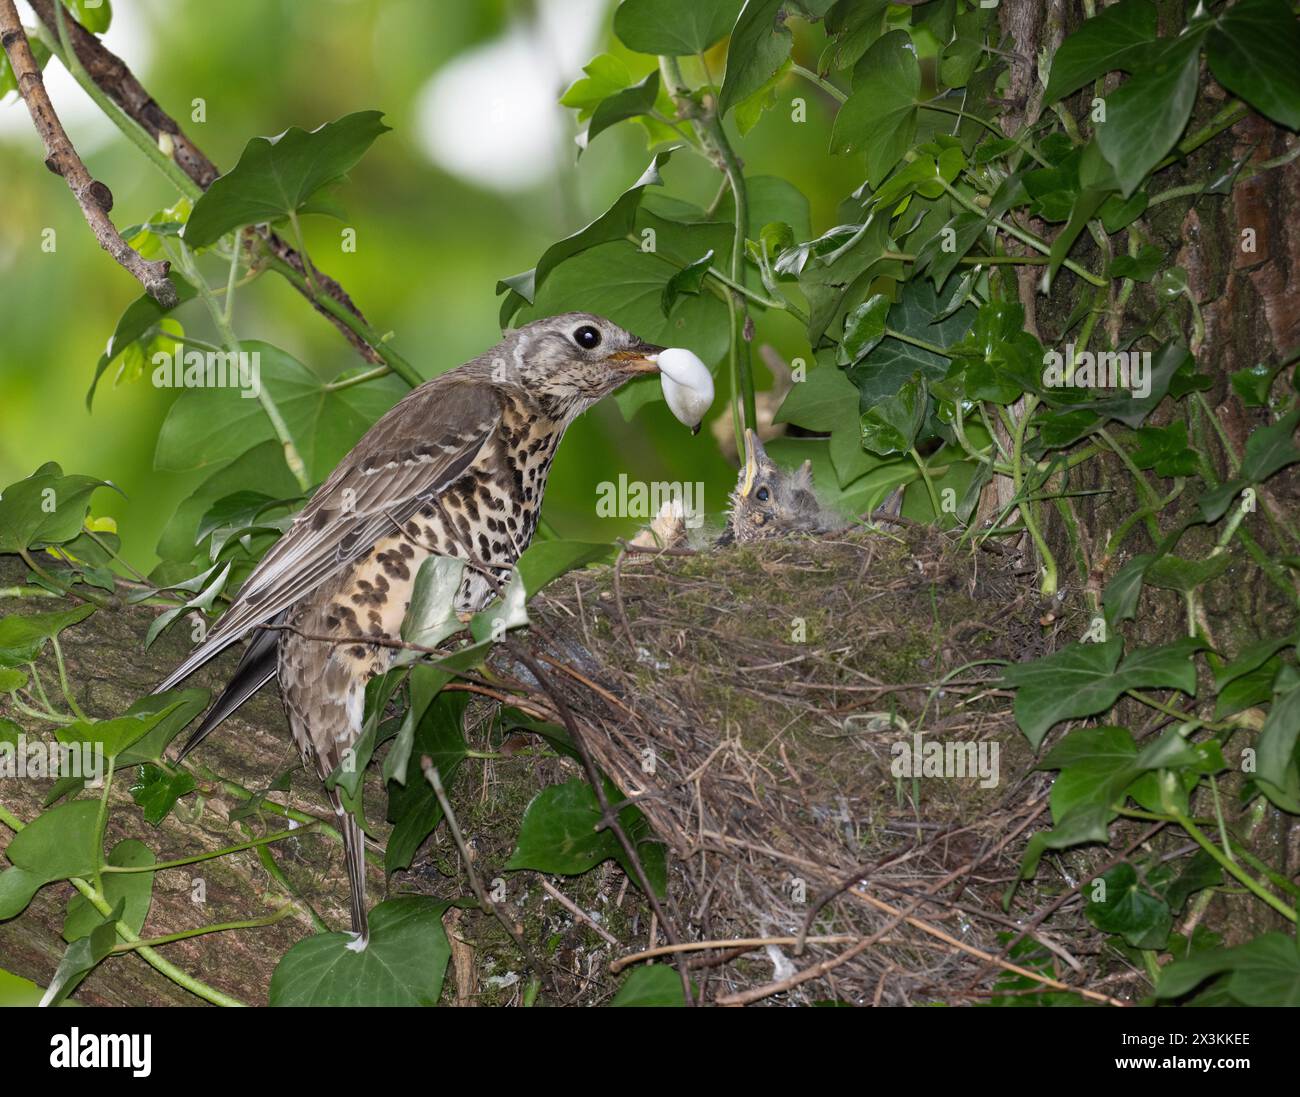 Adult Mistle Thrush, Turdus viscivorus, perched near nest and removing a faecal sac from chick, Queen's Park, London, United Kingdom Stock Photo